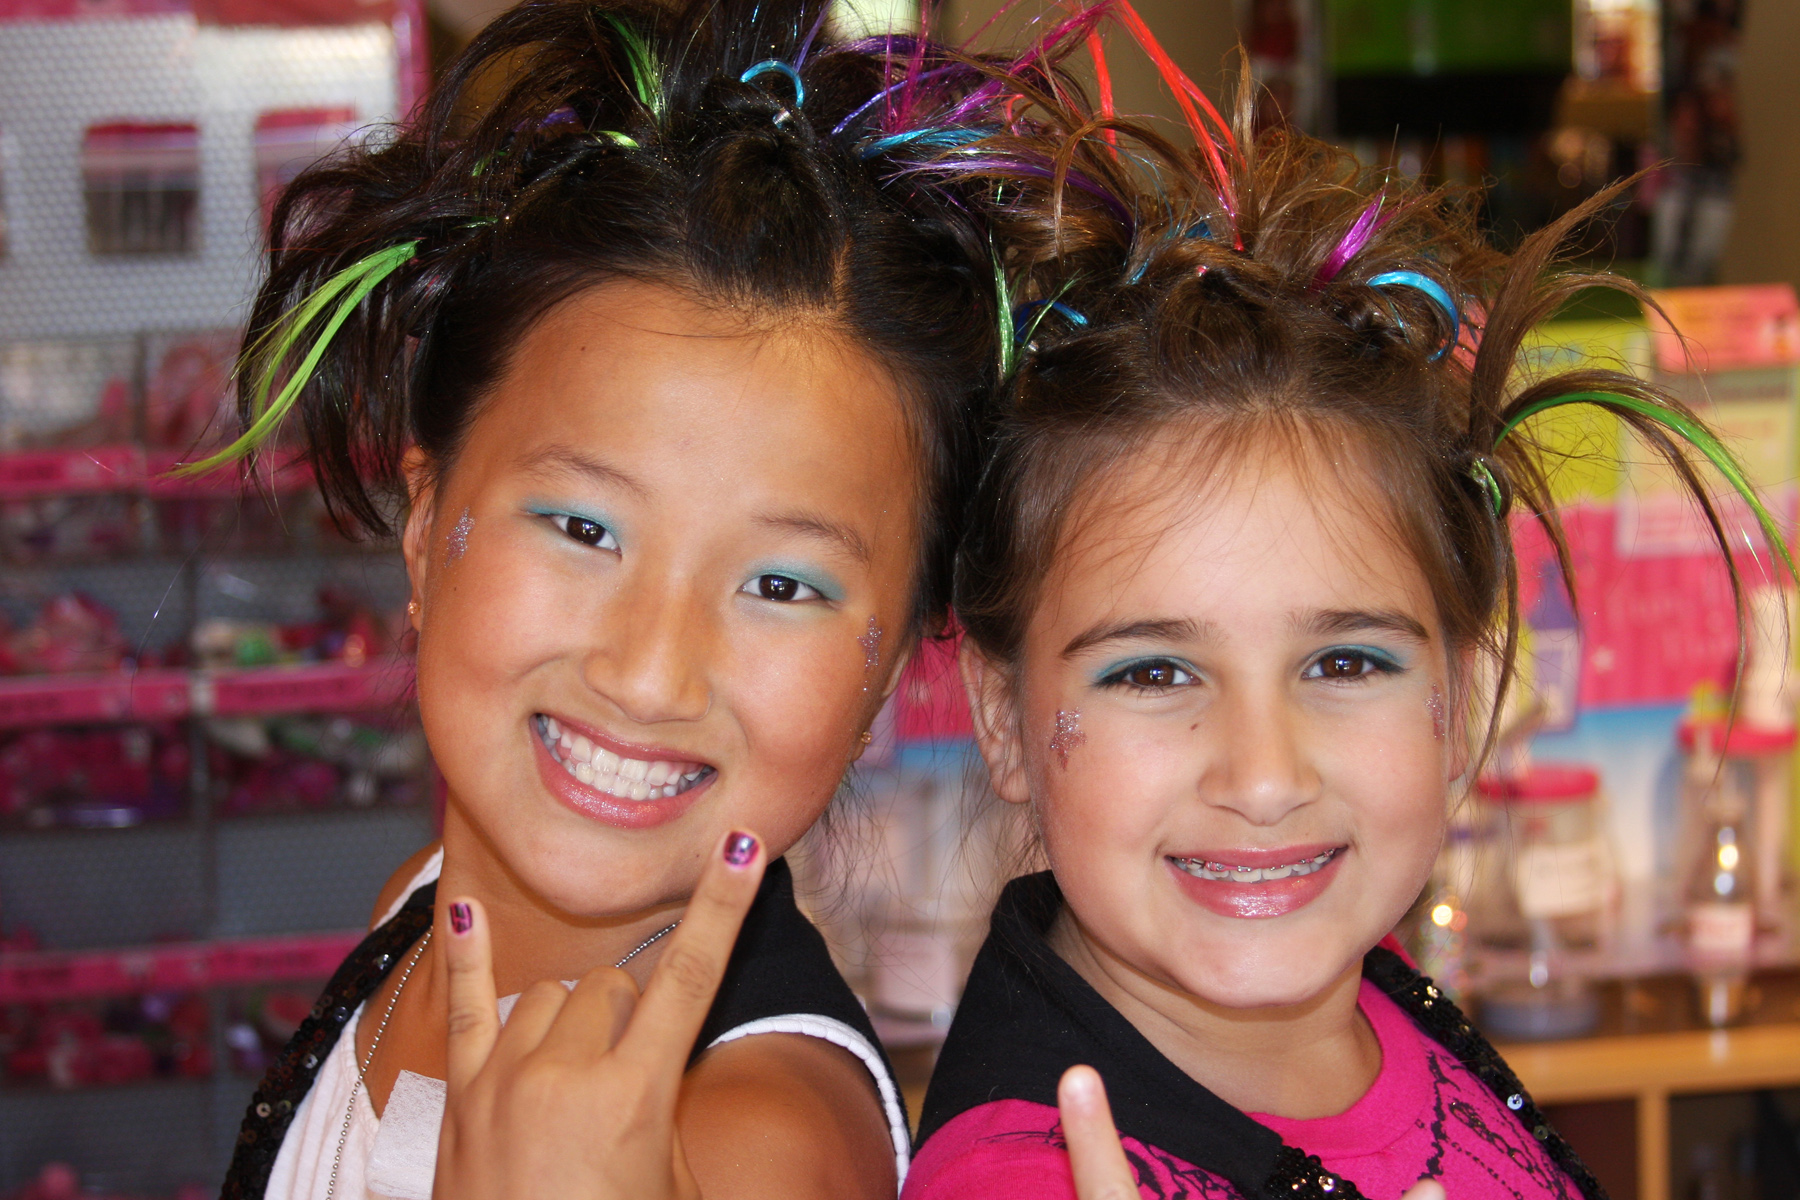 Two girls posing with rockstar hairstyles in kids hair salon